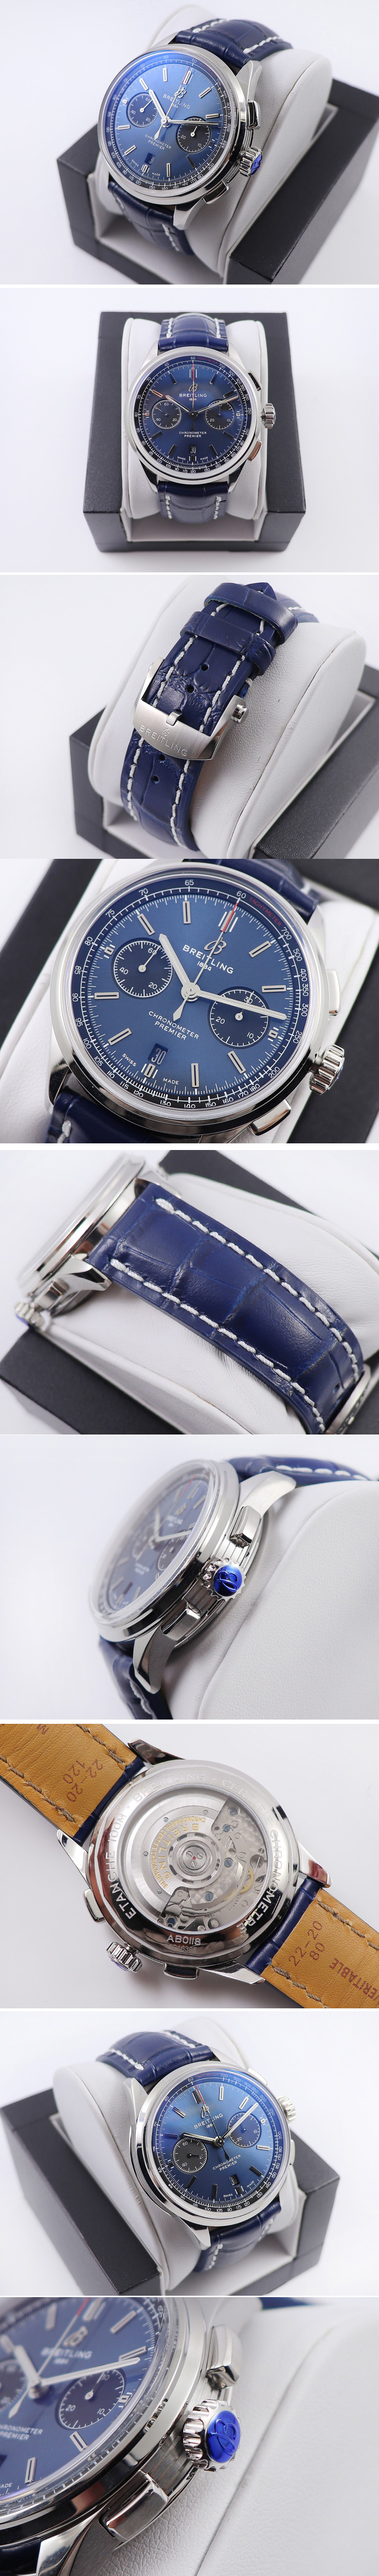 Replica Breitling Premier B01 Chronograph 42 Steel Watch GF Best Edtion in Blue Dial and Blue Leather With A7750